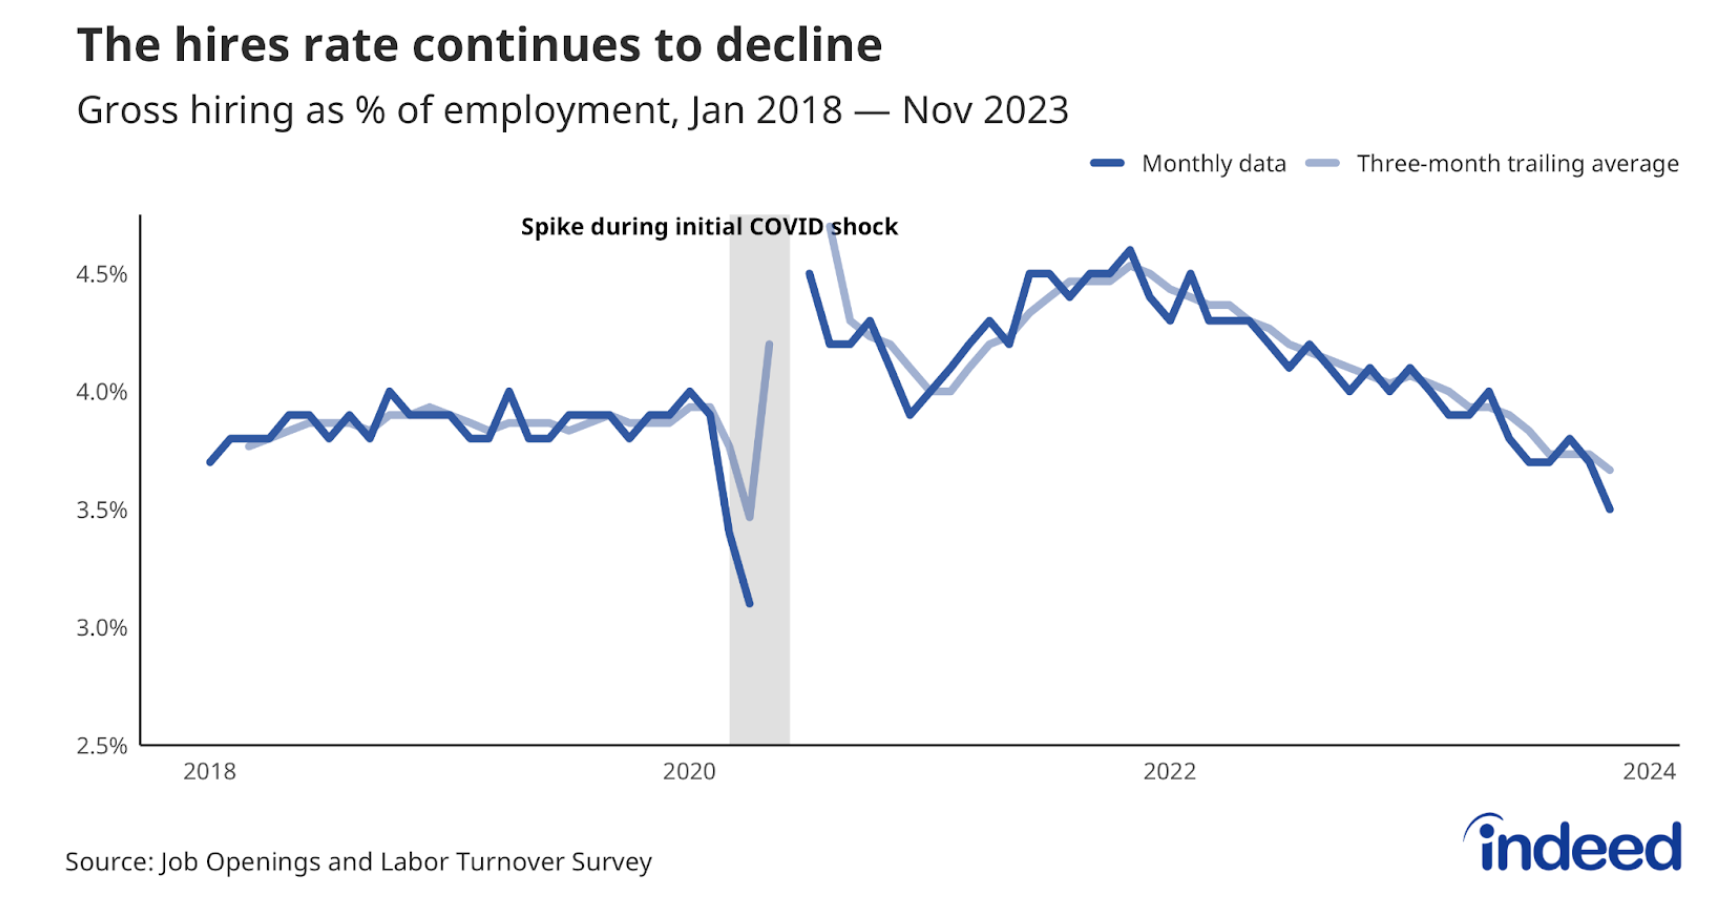 A line graph titled “The hires rate continues to decline” shows the hires rate from January 2018 to November 2023. The rate has been steadily declining since late 2021.